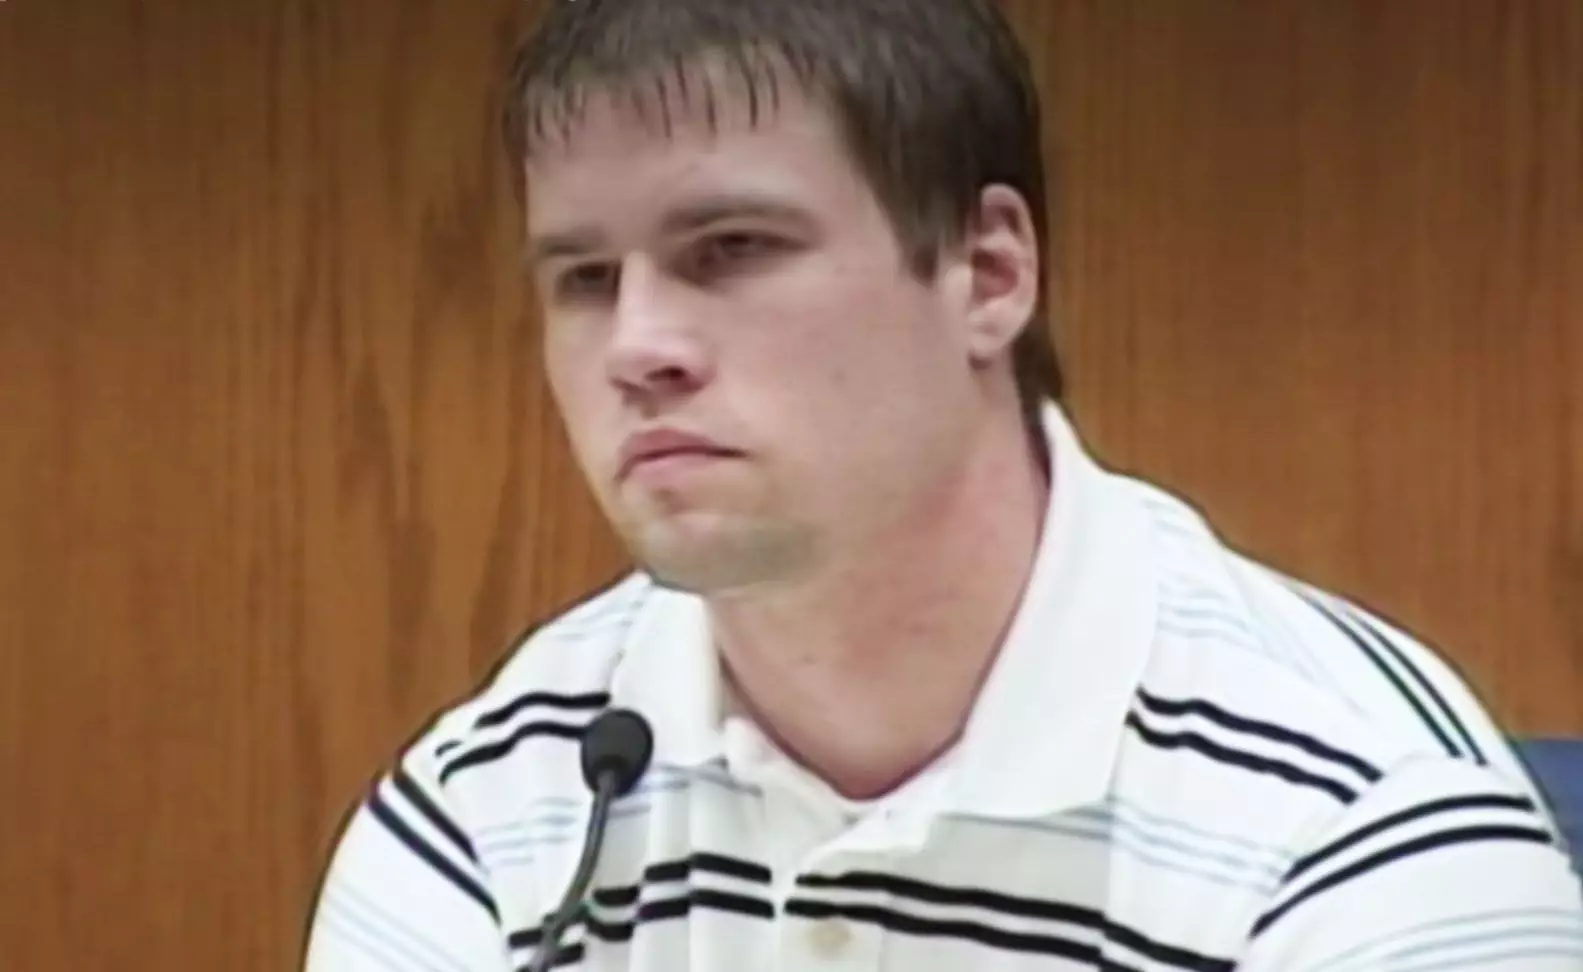 The new evidence links Bobby Dassey to the murder victim (